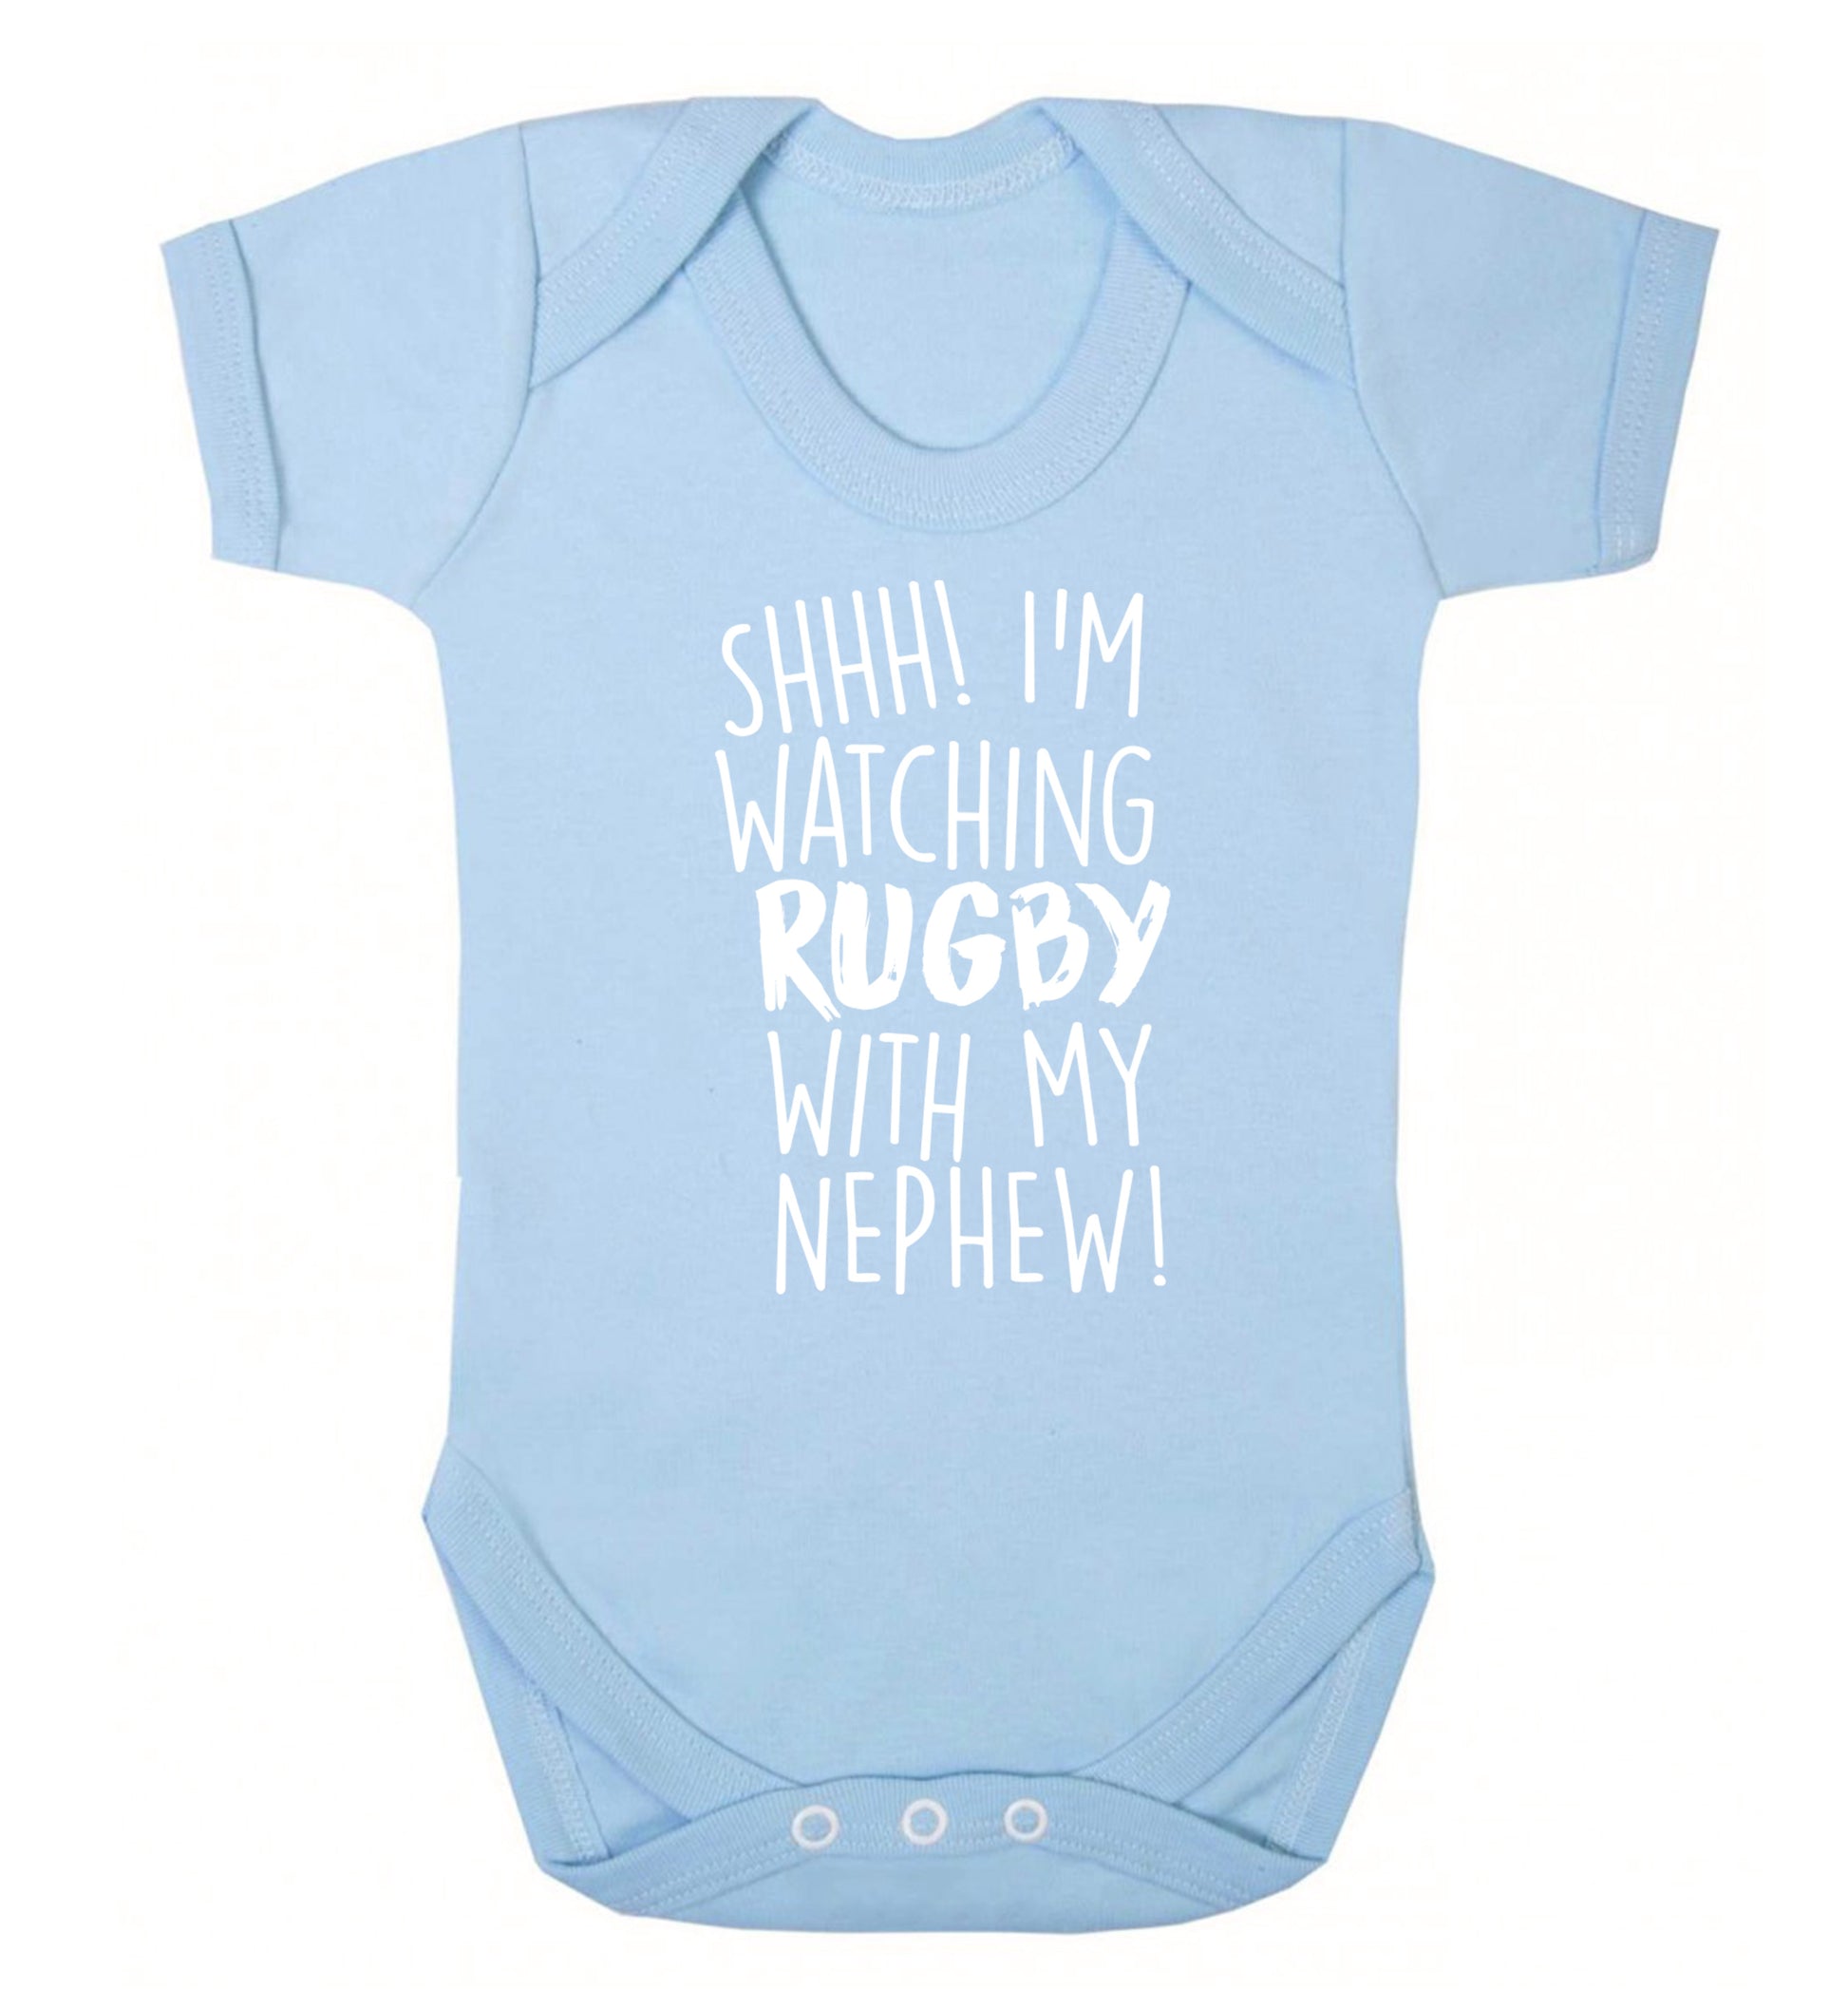 Shh.. I'm watching rugby with my nephew Baby Vest pale blue 18-24 months